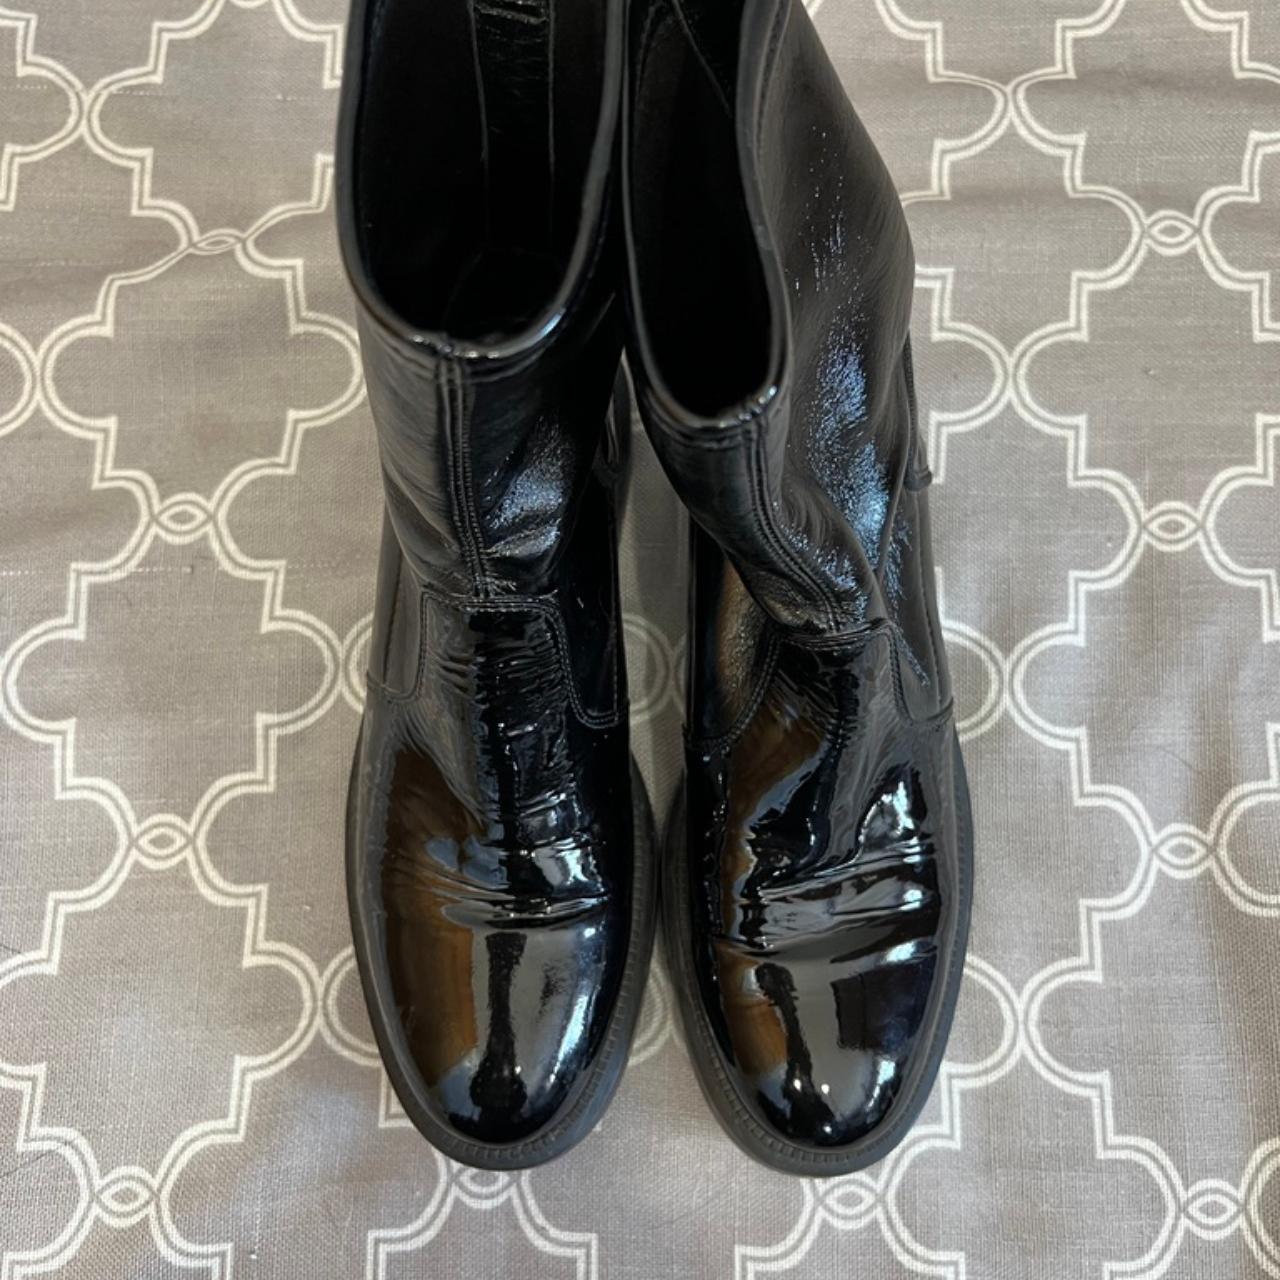 Amazing black patent leather pull-on booties from... - Depop